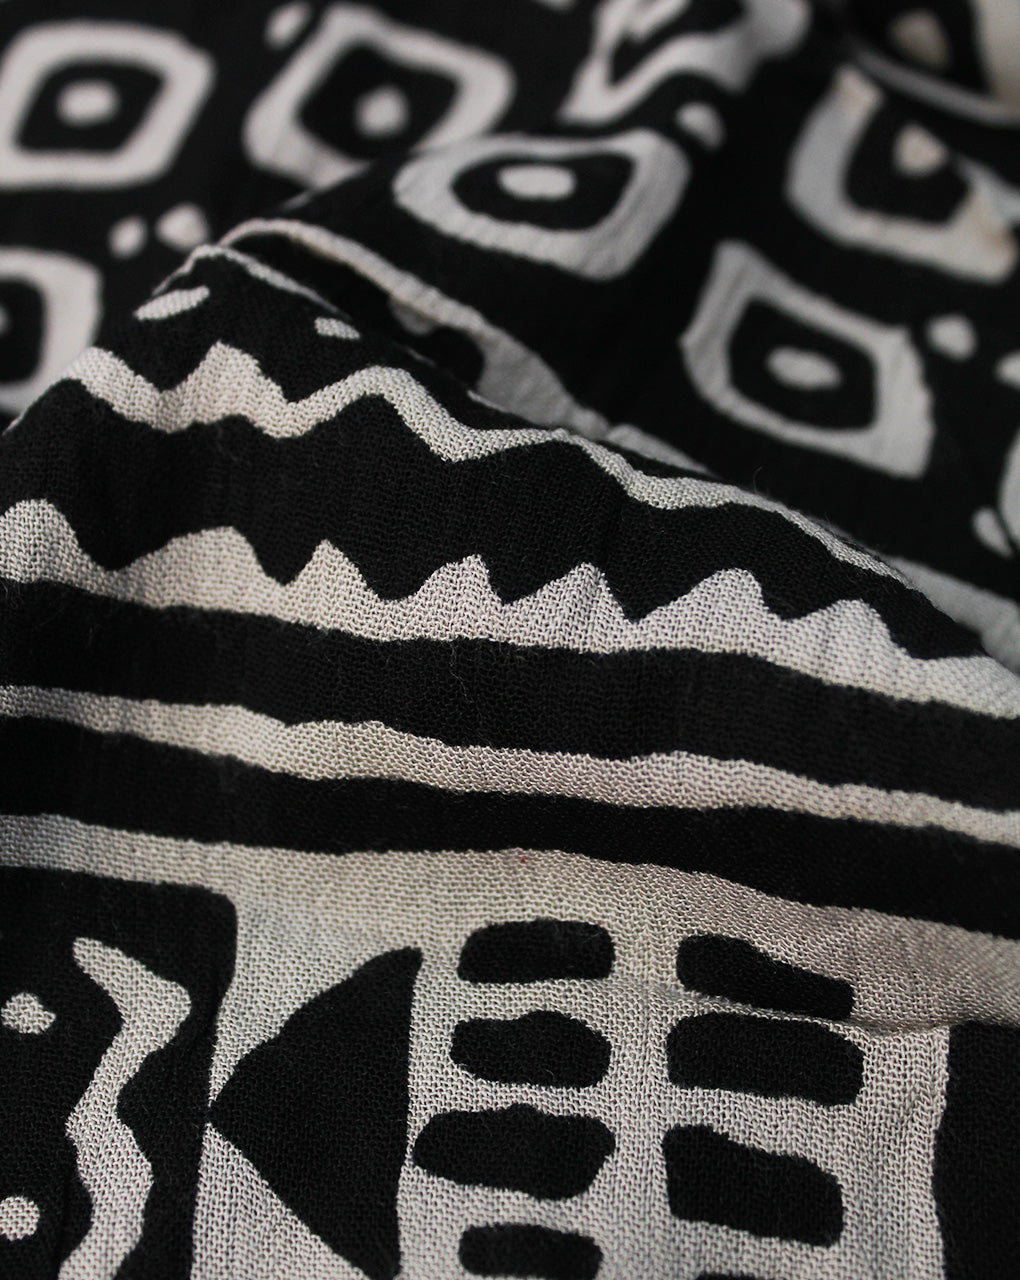 BEIGE & BLACK ABSTRACT DESIGN RAYON CREPE PRINTED FABRIC